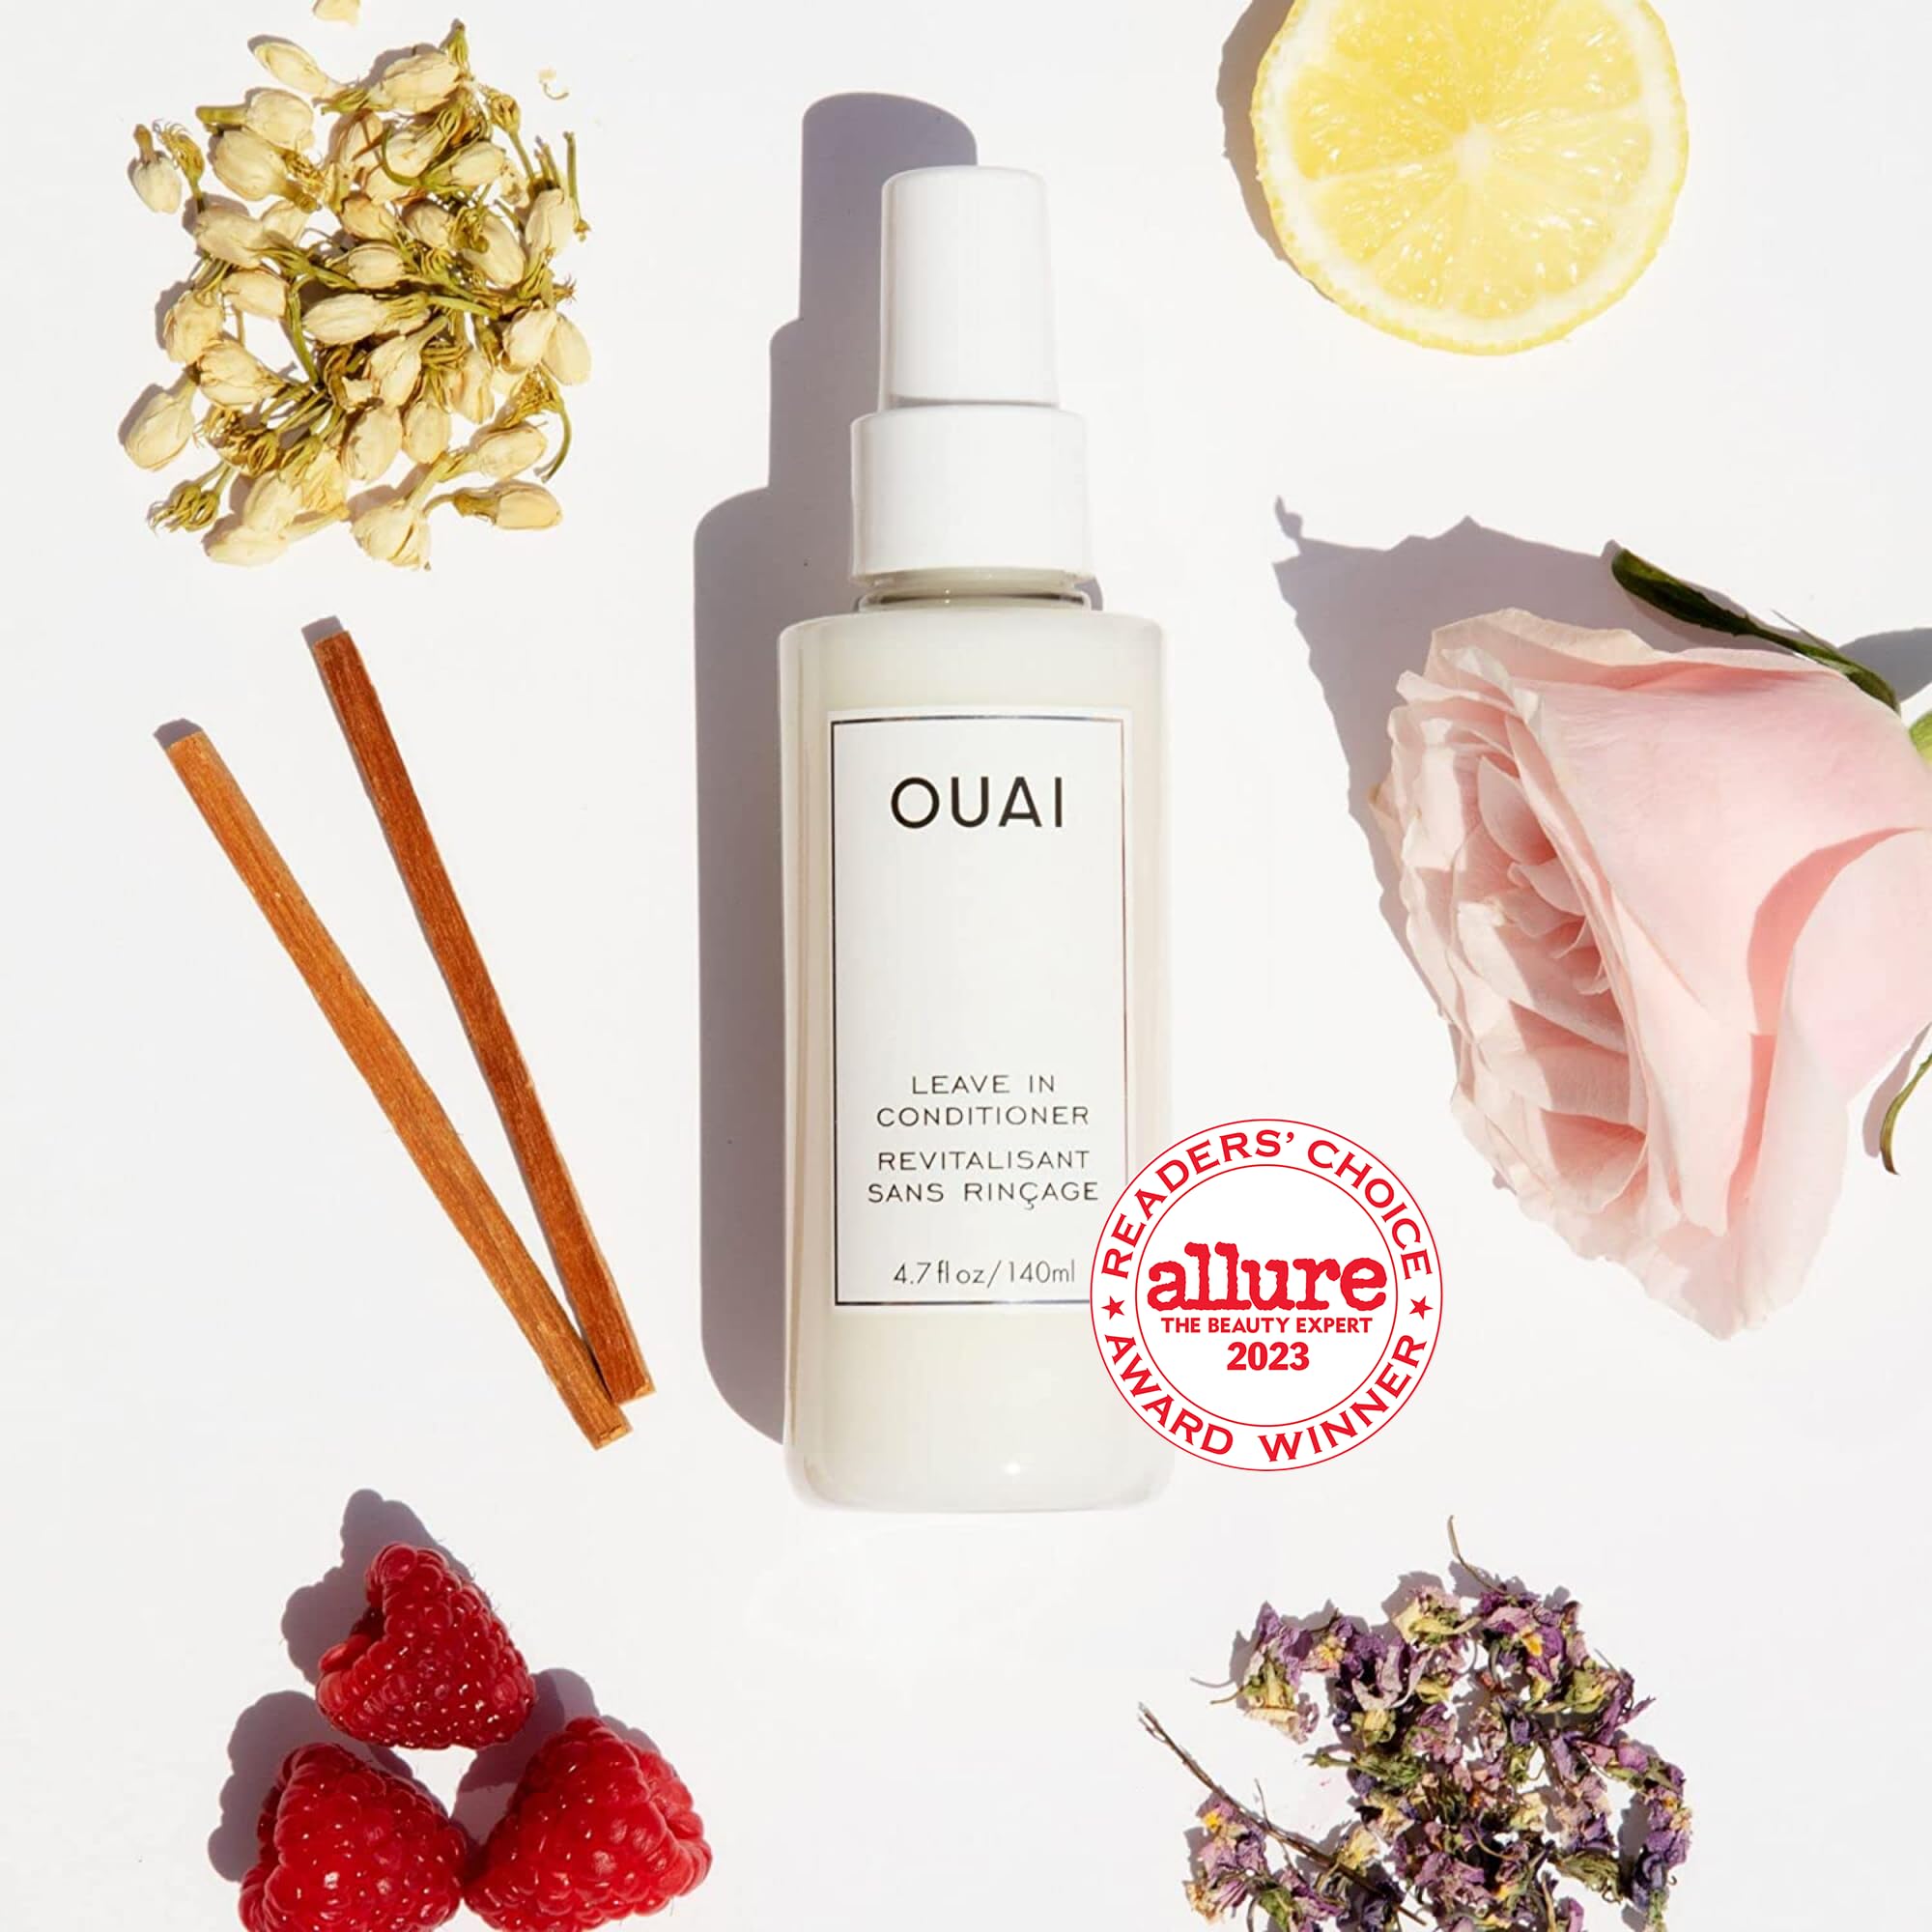 OUAI Leave-In Conditioner - Multitasking Mist that Protects Against Heat, Primes Hair for Style, Smooths Flyaways, Adds Shine & Detangles - Free of Parabens, Sulfates & Phthalates - 4.7 fl oz